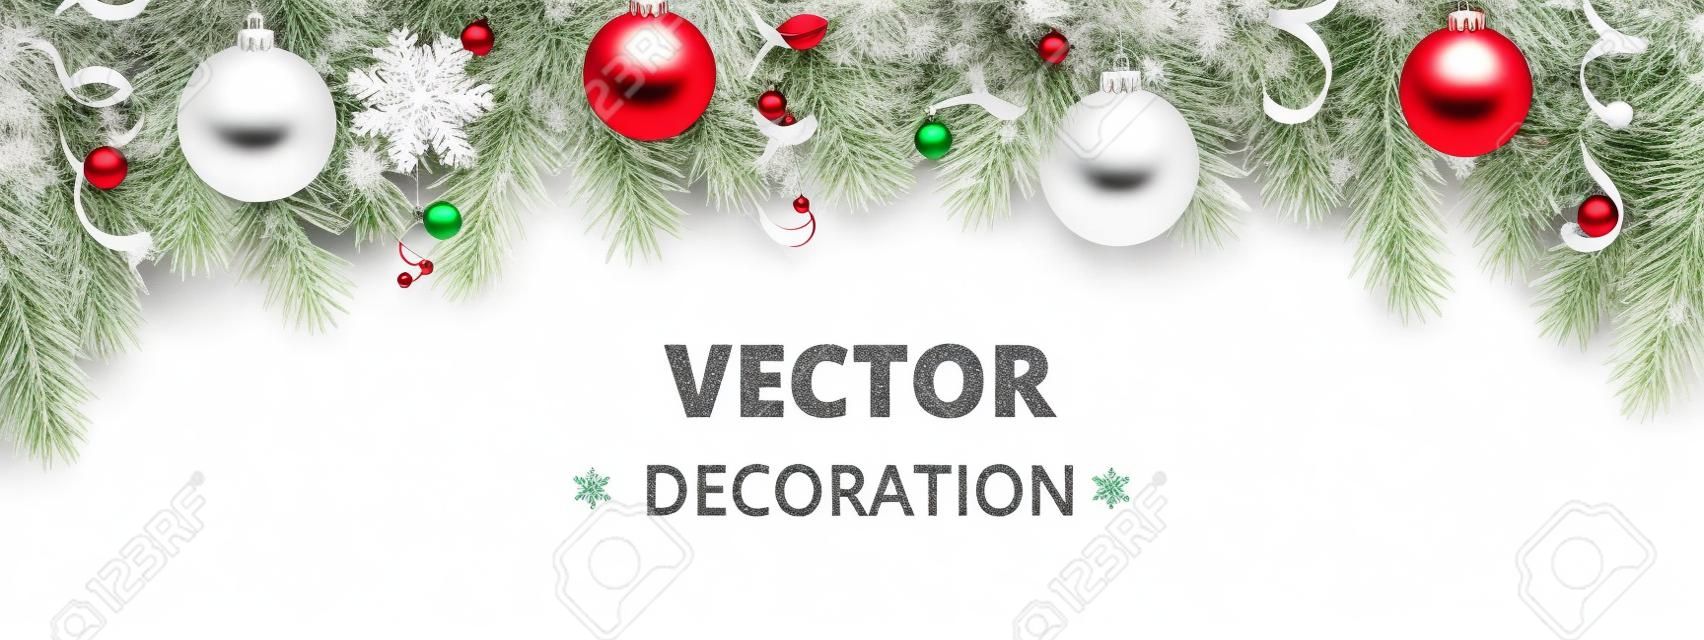 Winter holiday background. Border with Christmas tree branches isolated on white. Garland, frame with hanging baubles, streamers. Great for Christmas, New year cards, banners, headers, party posters.